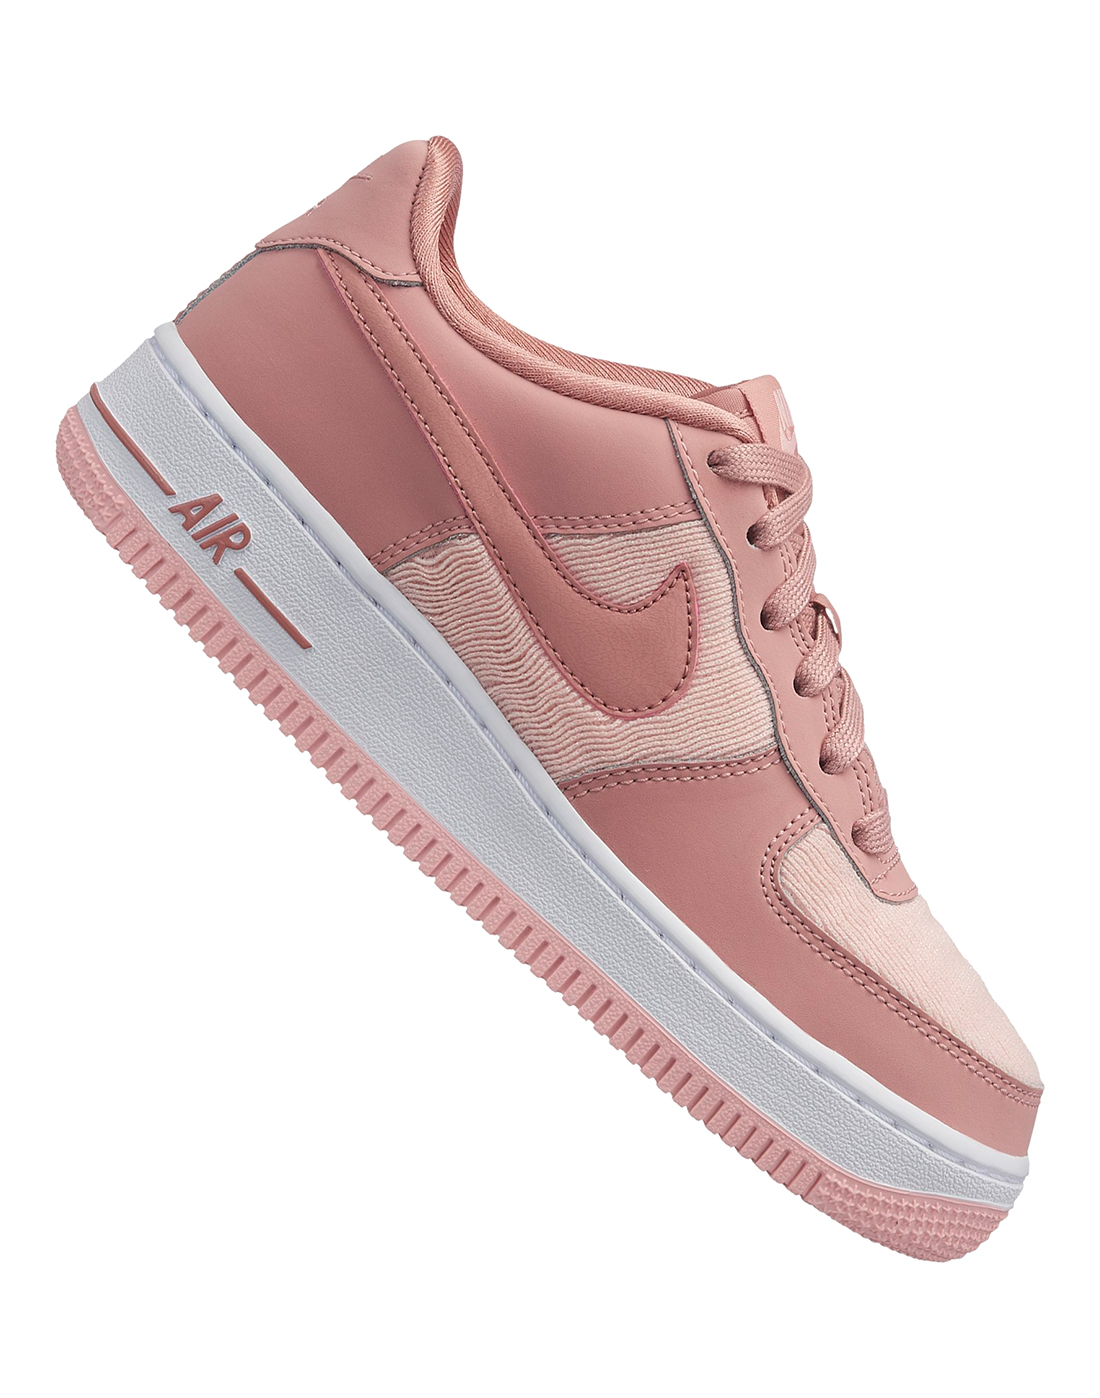 lifestyle sports nike air force 1